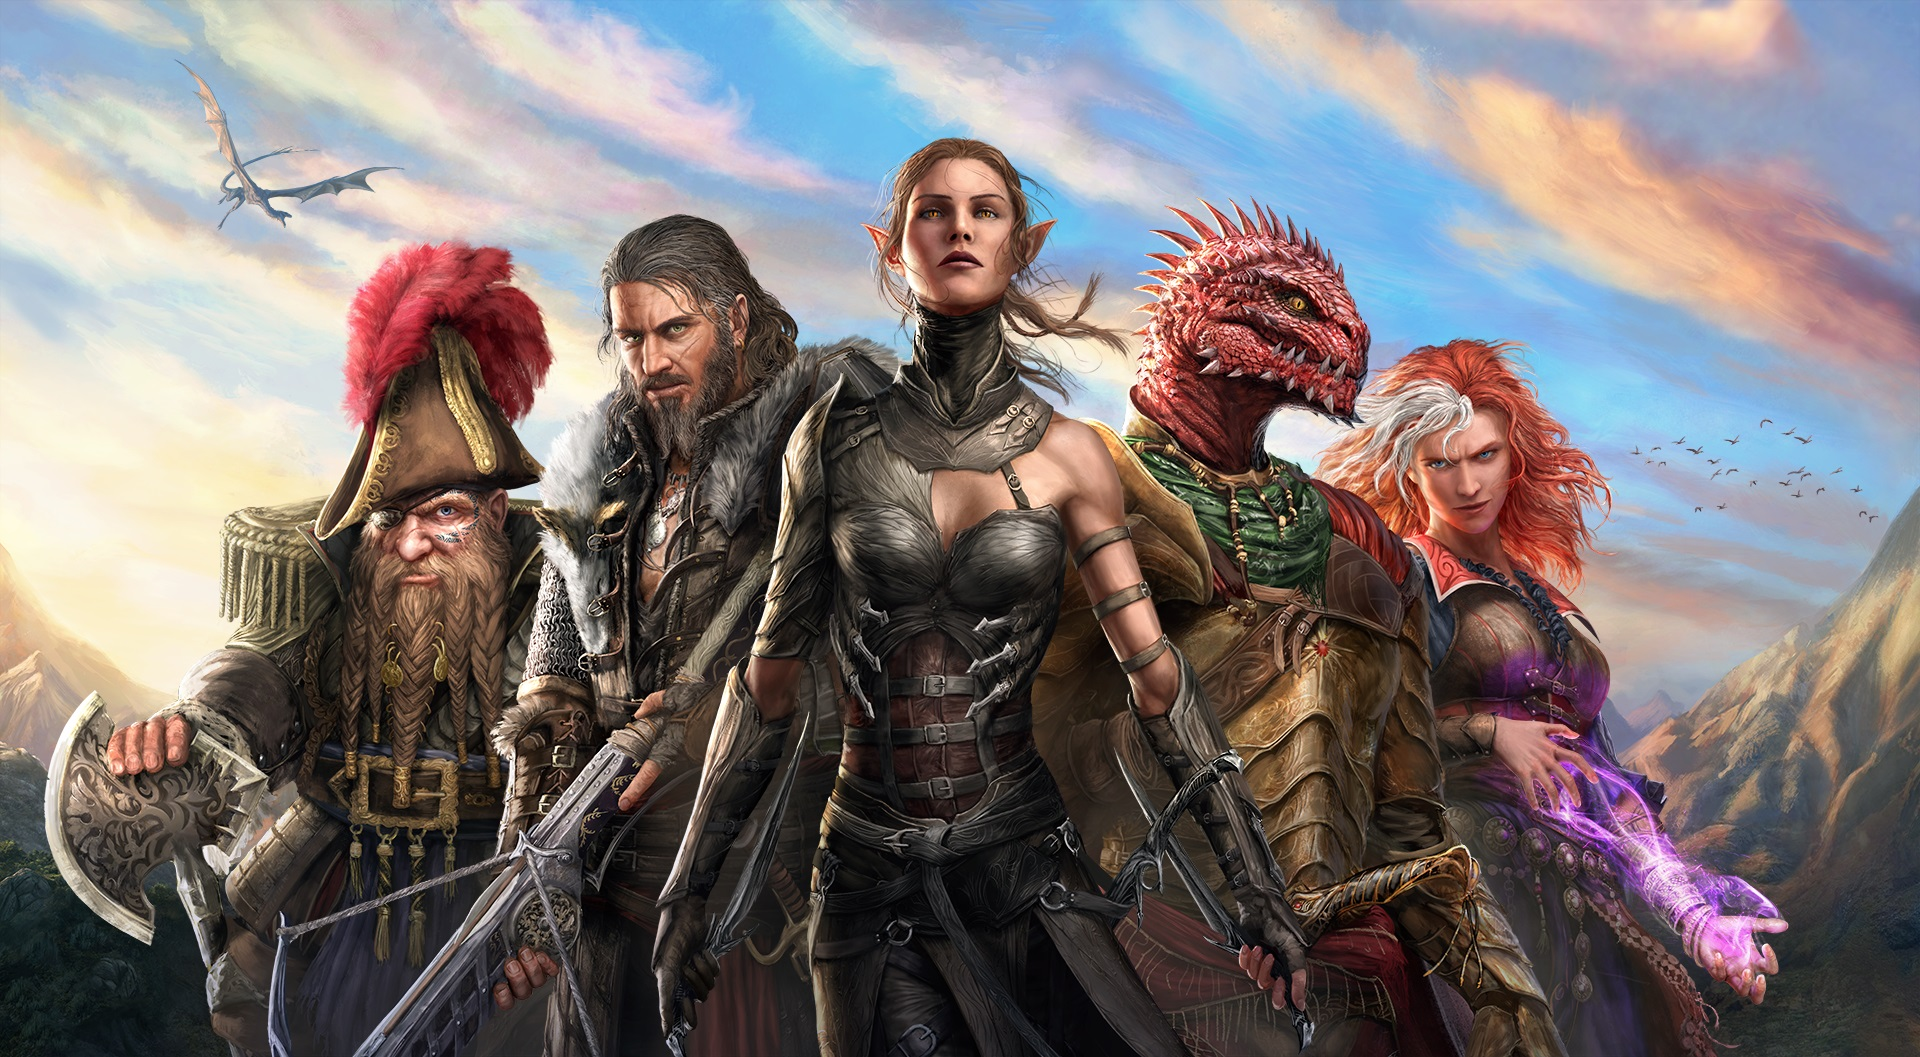 An image of the cast of Divinity: Original Sin 2, arranged dramatically.